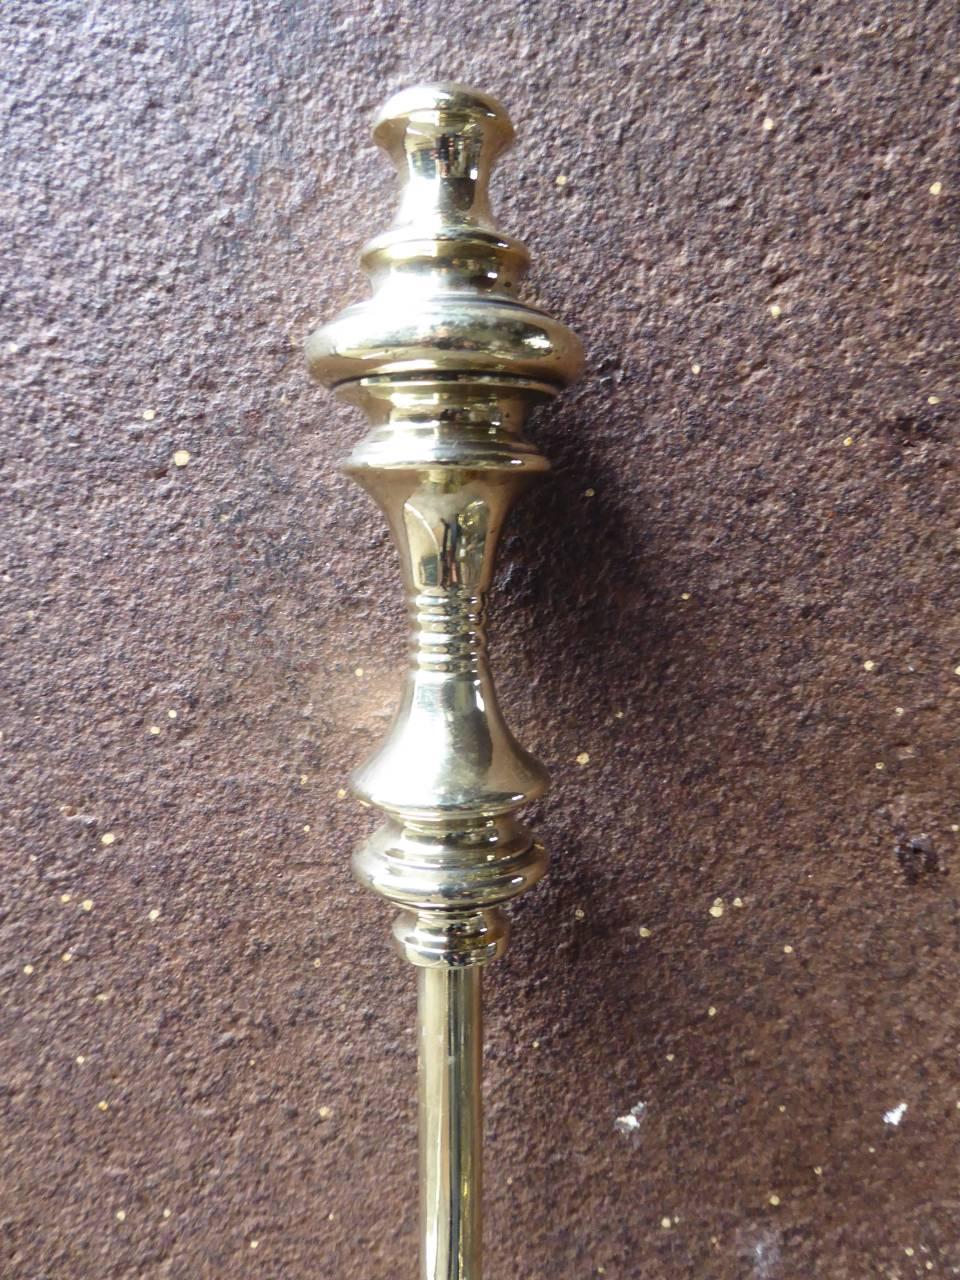 19th century English Victorian fireplace poker made of polished brass.

We have a unique and specialized collection of antique and used fireplace accessories consisting of more than 1000 listings at 1stdibs. Amongst others we always have 300+